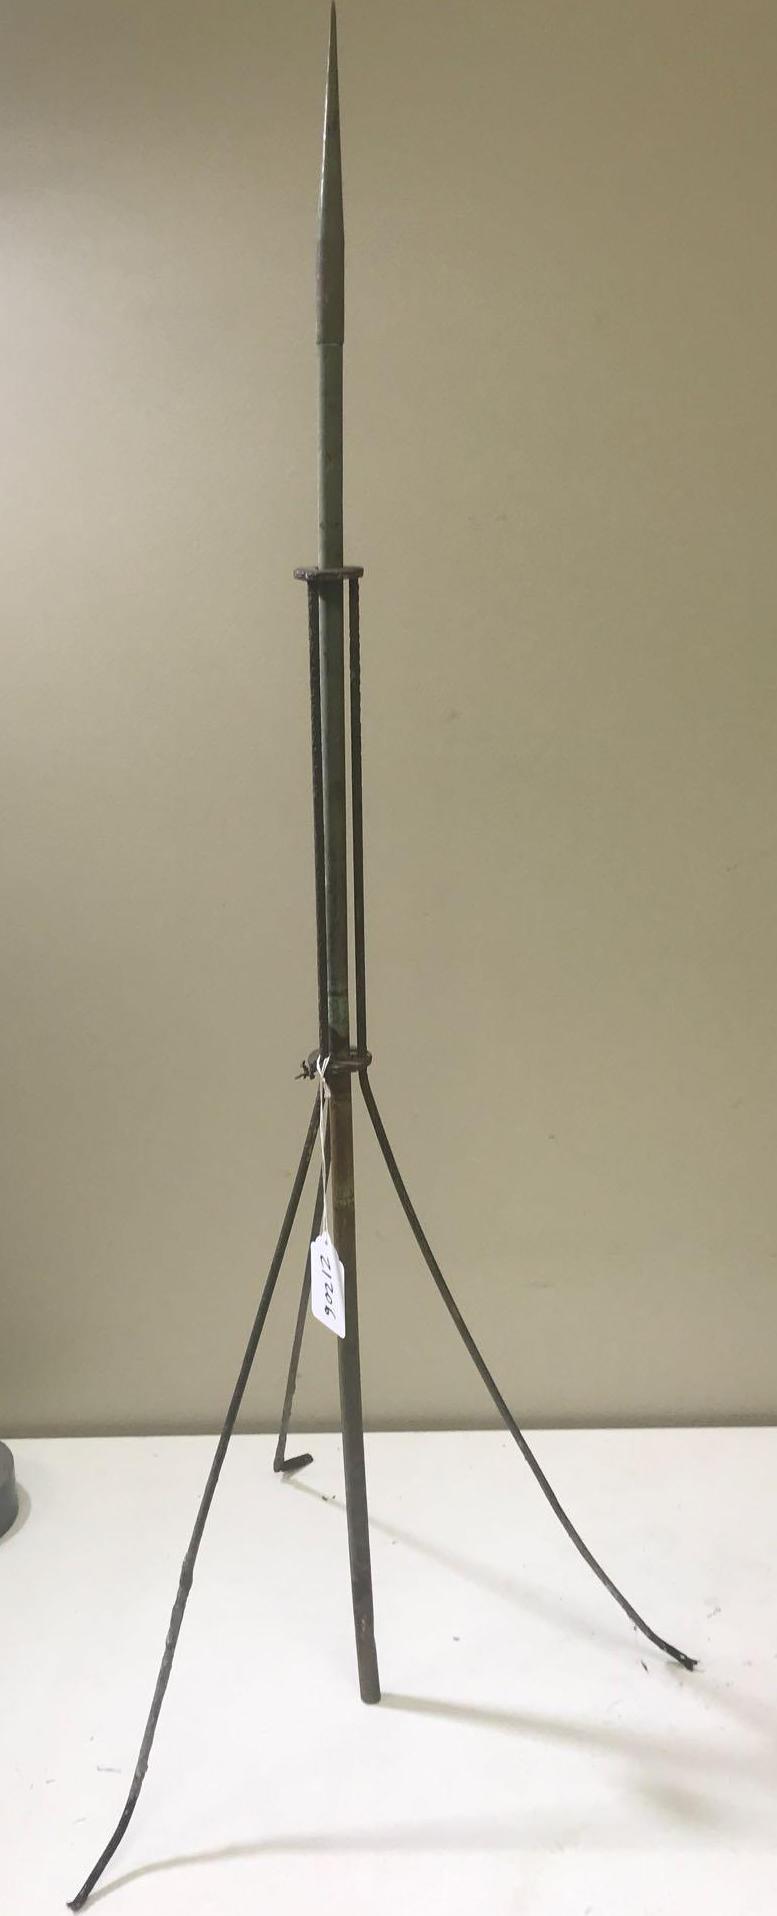 Lightning rod with stand, 47 inches tall